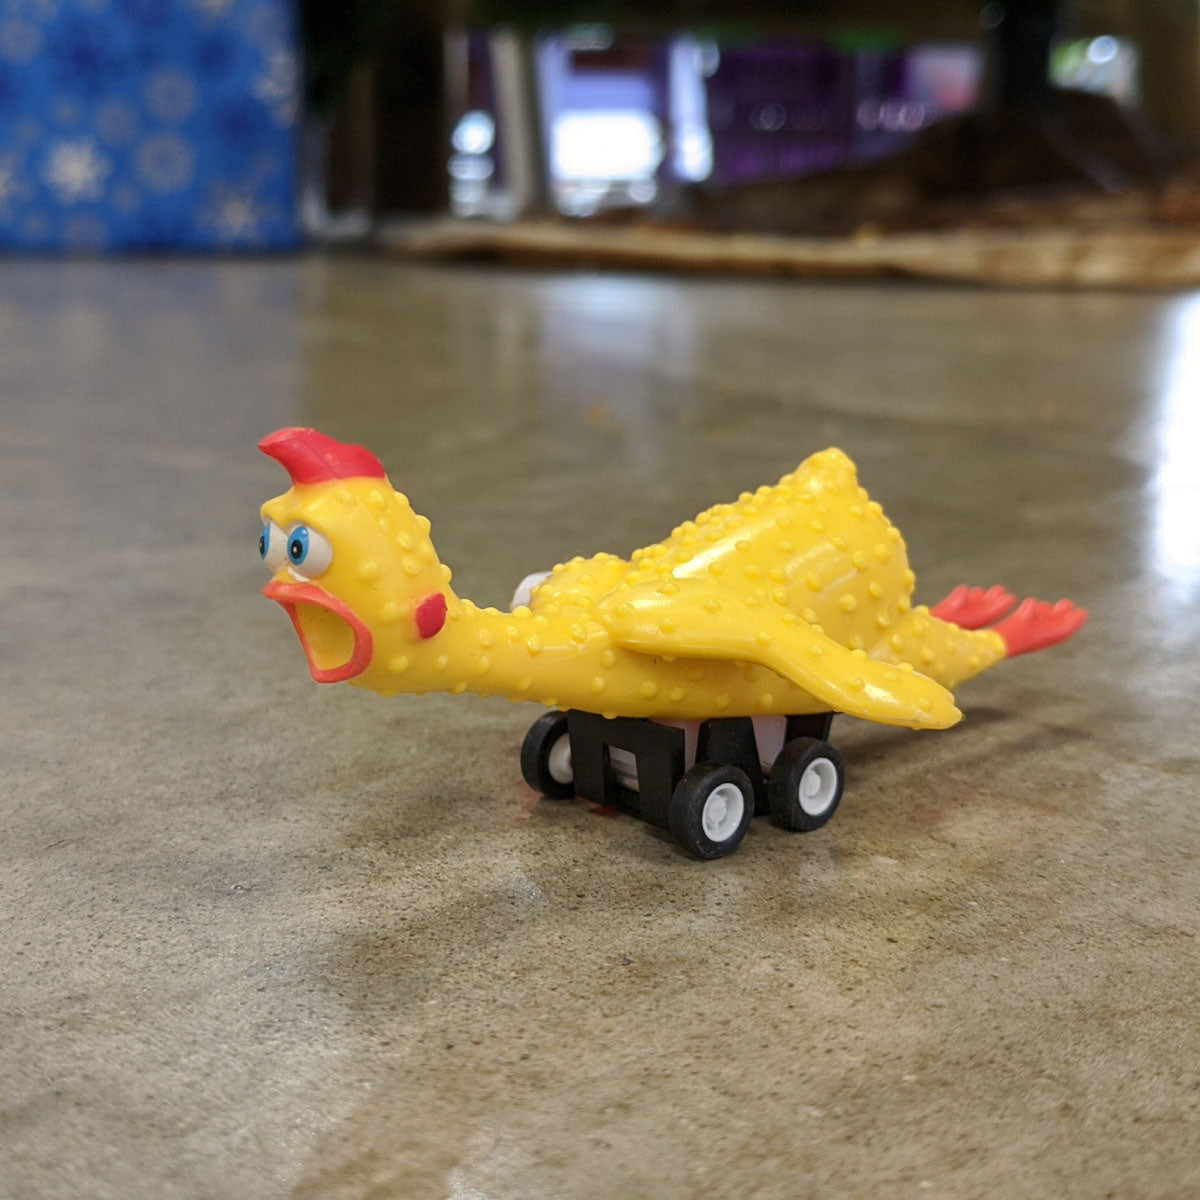 Racing Rubber Chicken from Archie McPhee